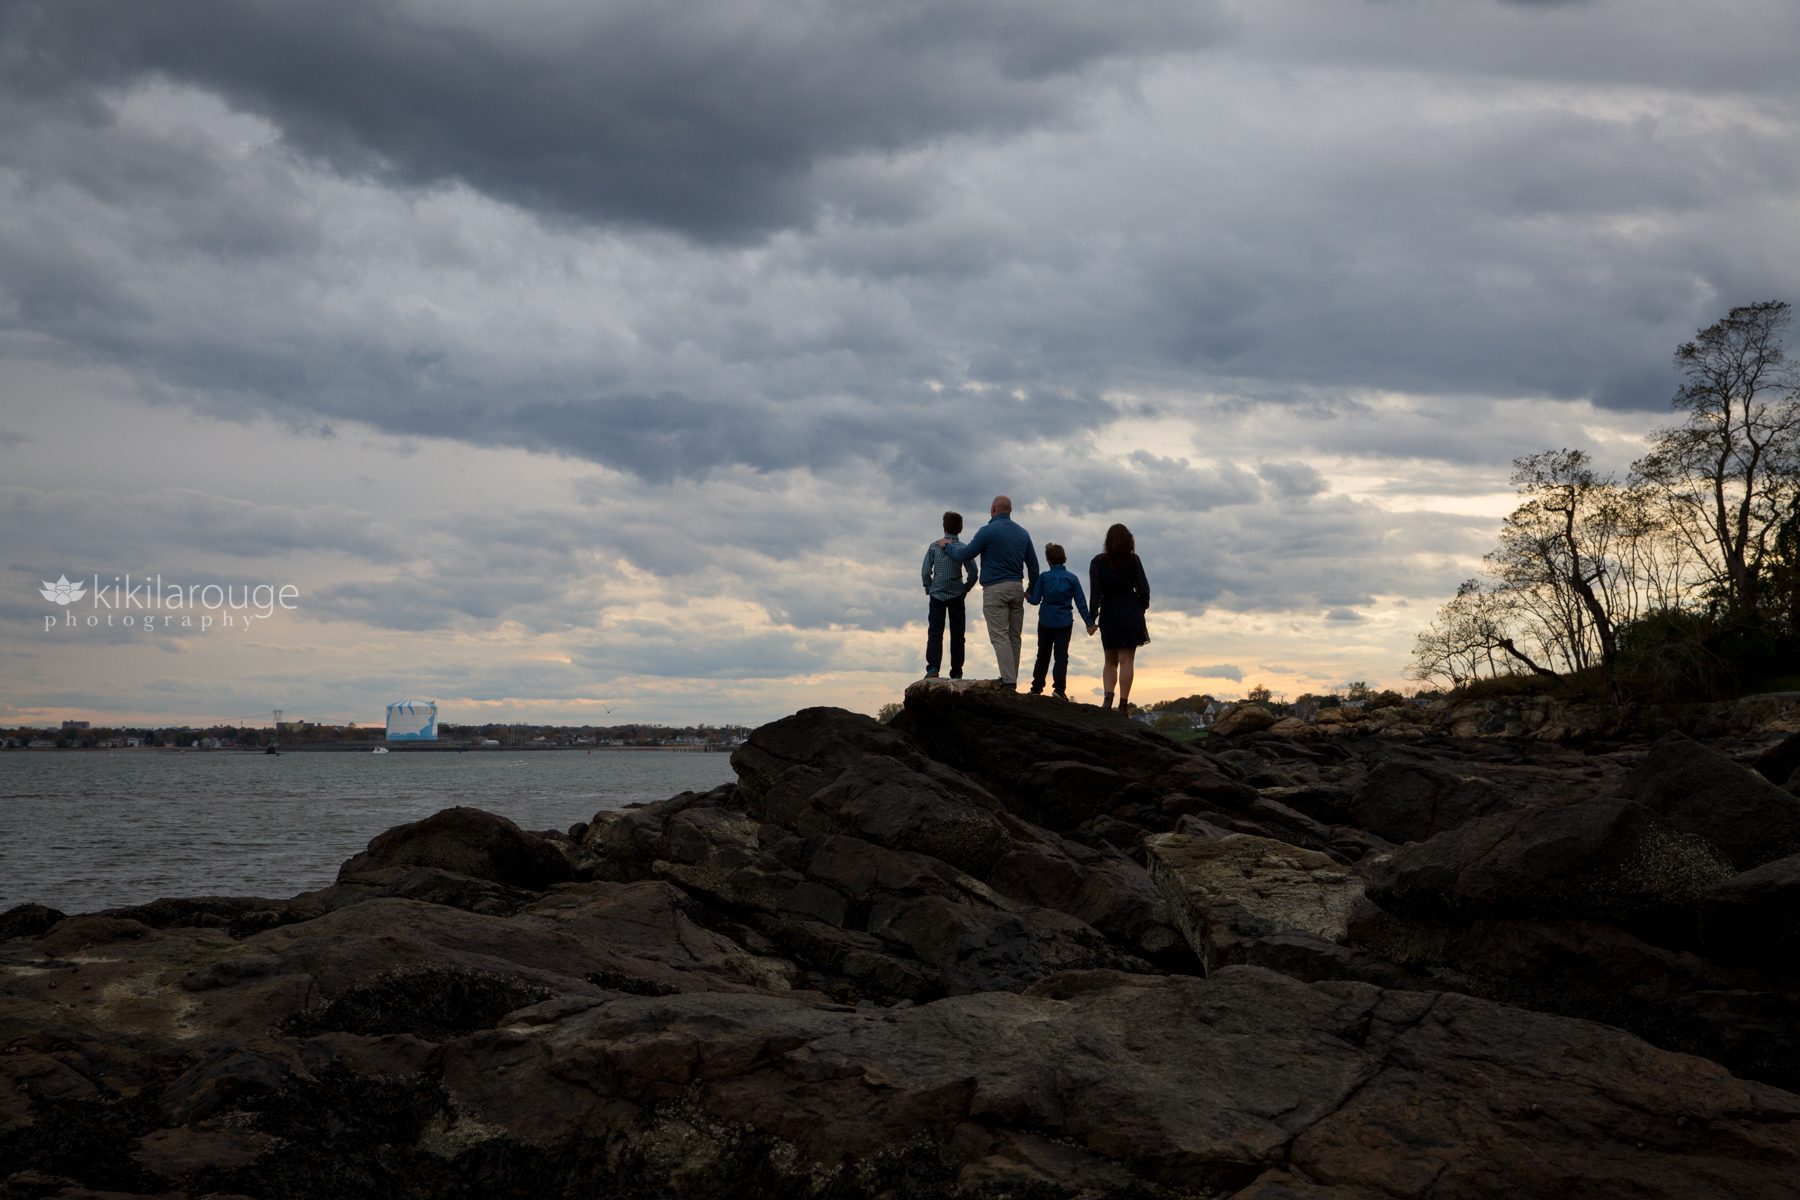 Family Portrait silhouette on rocks with dramatic sunset